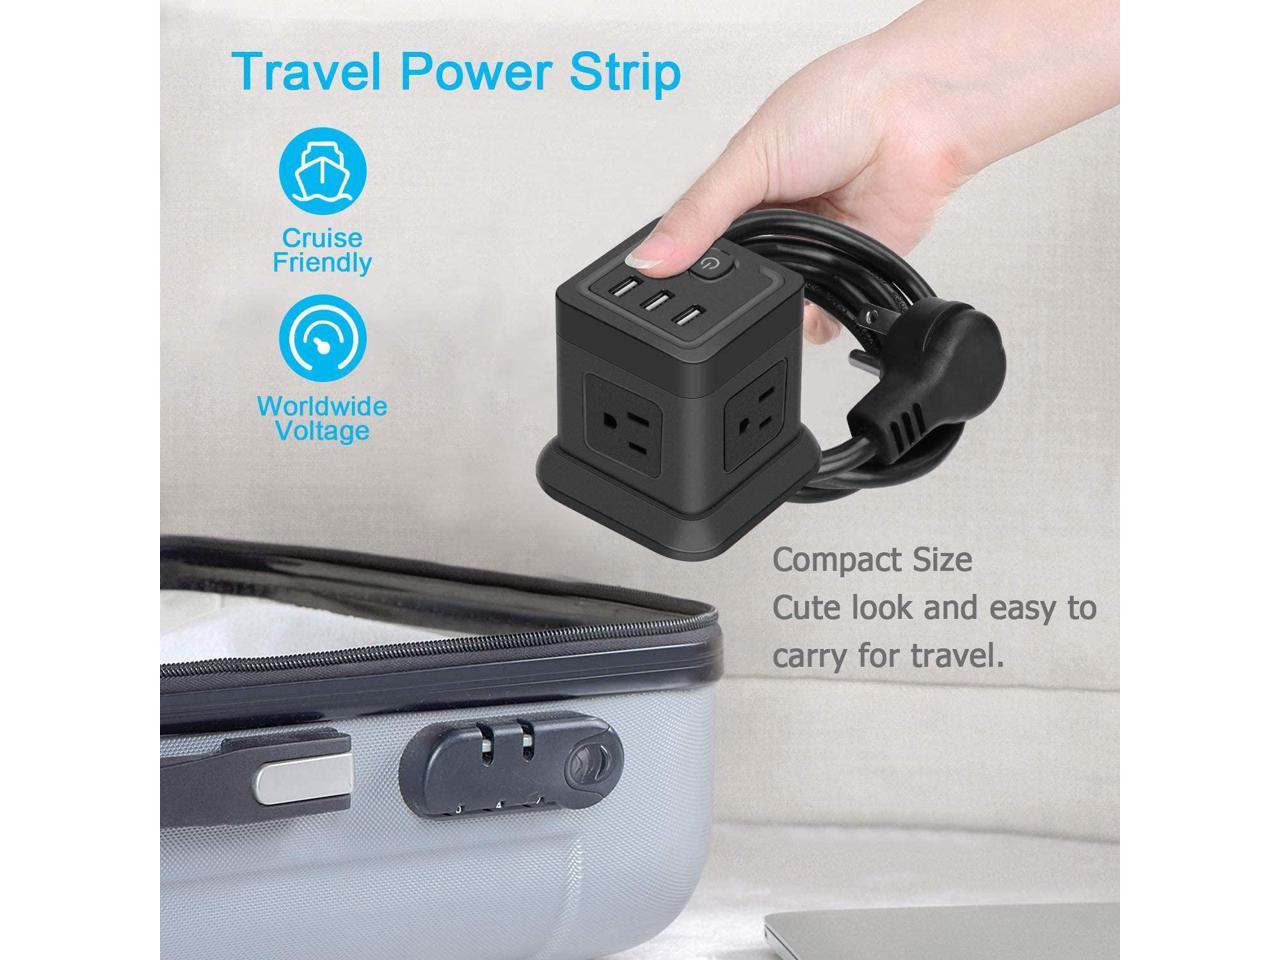 Compact Portable for Travel Home Office Cruise Ship FDTEK Flat Plug Extension Cord with 4 Outlets and 3 USB Ports Power Strip with USB Overload Protection 5 FT Power Cord Desktop Charging Station 